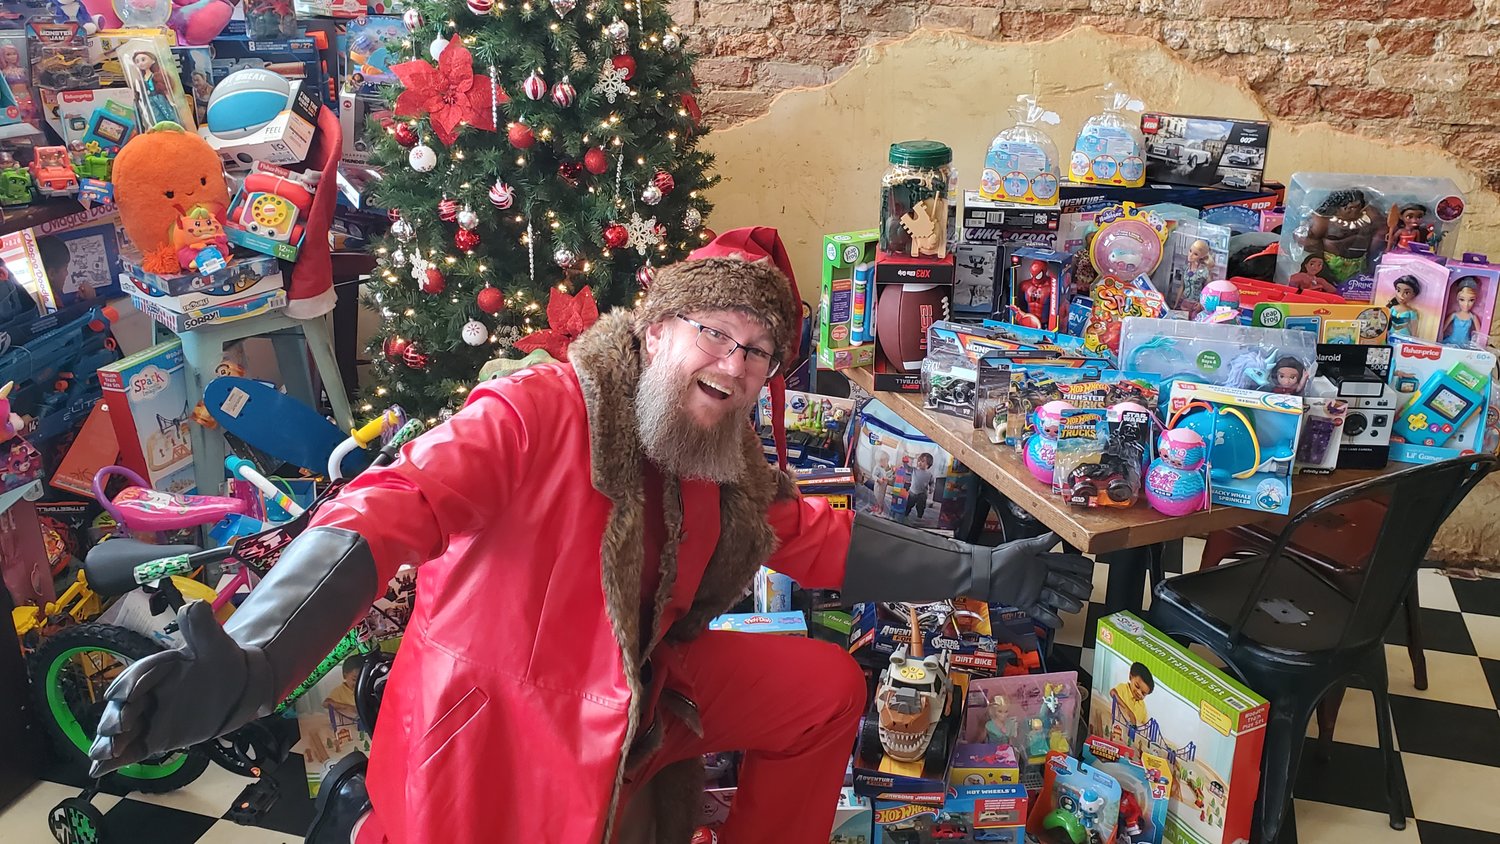 Jason Herring displays some of the toys gathered for the Toys for Tots program during a pub crawl held in downtown Mineola Dec. 17. Participants donated a toy, and additional donations were used to purchase more toys. Taking part were Cowburners, Kitchen’s, Logan’s Place, The Line and RNA Tavern. All the toys collected by Toys for Tots remain in Wood County. The program is a project of the Marines’ Toys for Tots Foundation.